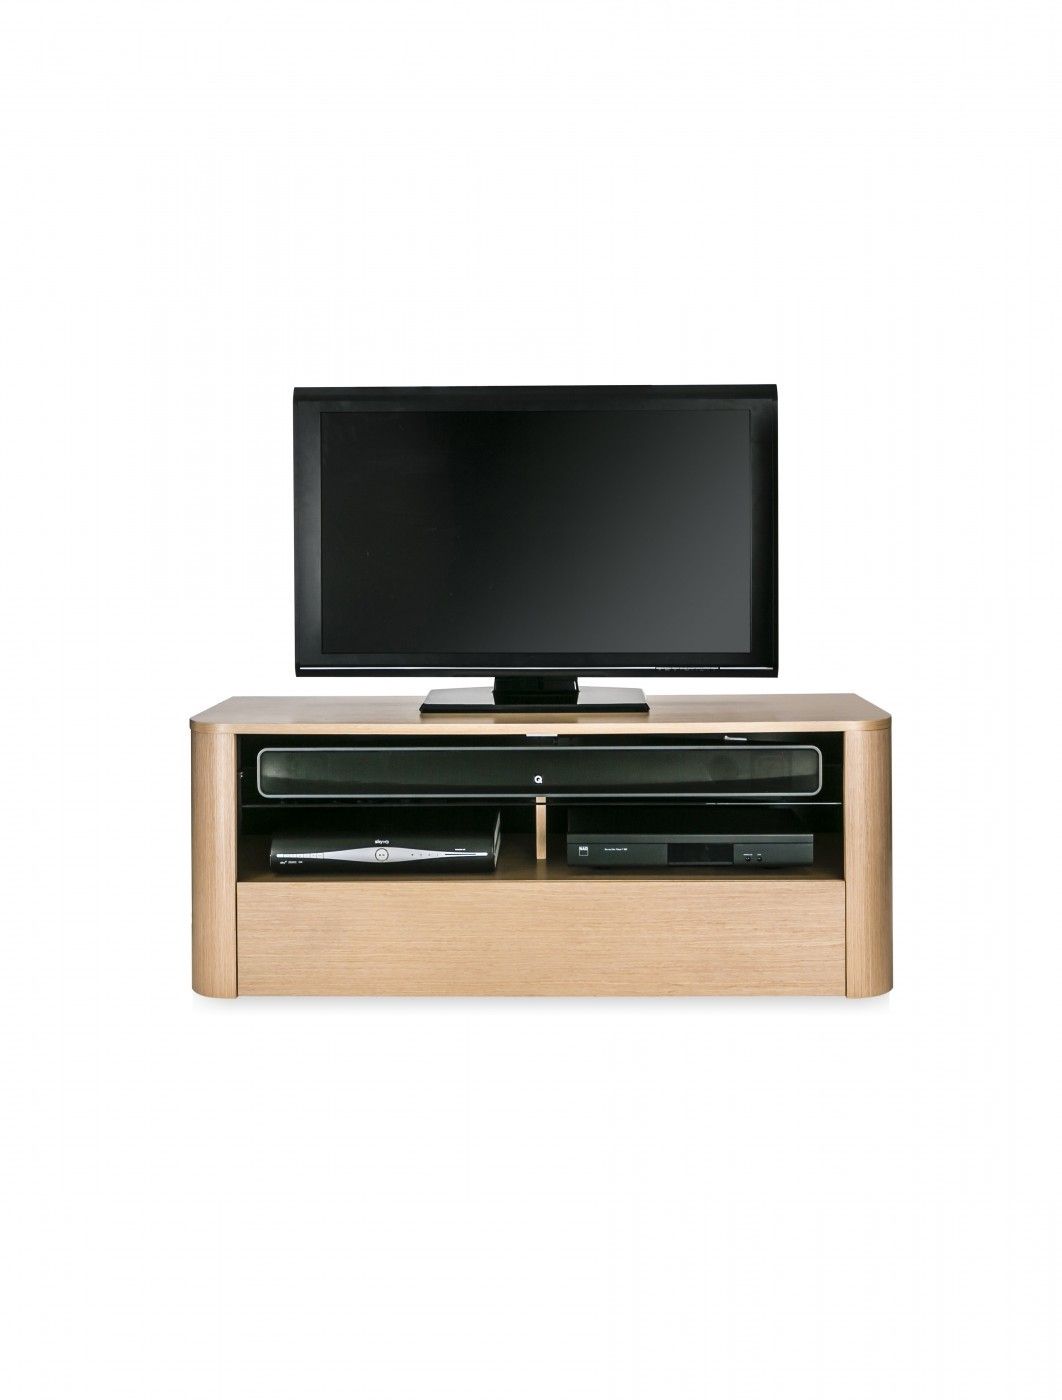 Alphason Hugo Tv Stand Adh1260 Lo Light Oak | 121 Tv Mounts With Alphason Tv Cabinet (View 12 of 15)